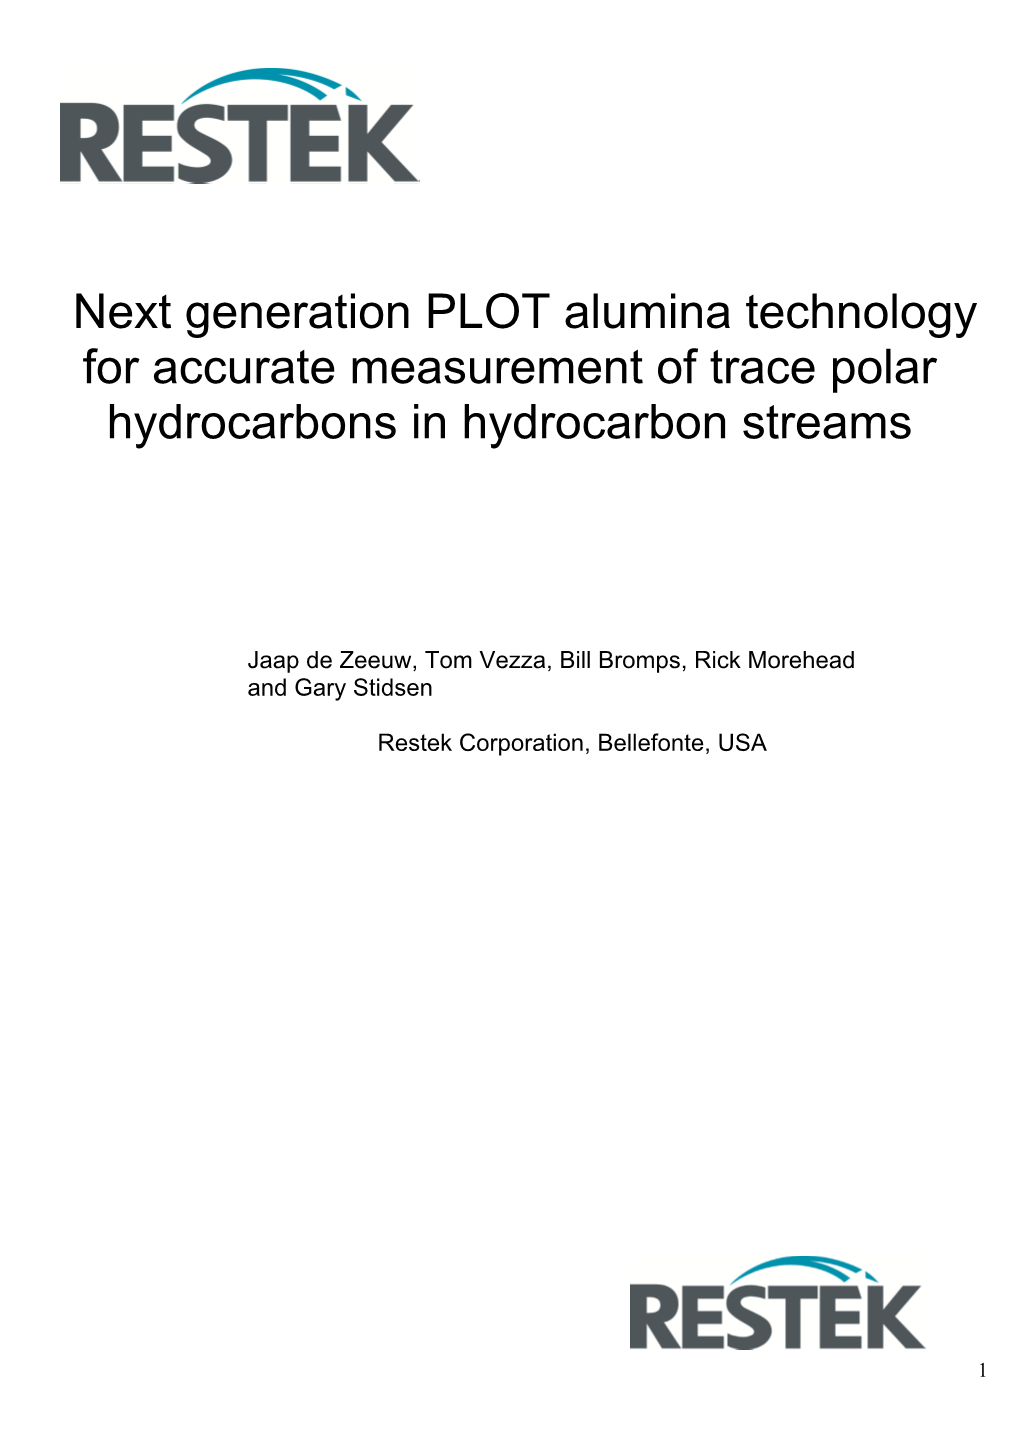 Next Generation PLOT Alumina Technology for Accurate Measurement of Trace Polar Hydrocarbons in Hydrocarbon Streams